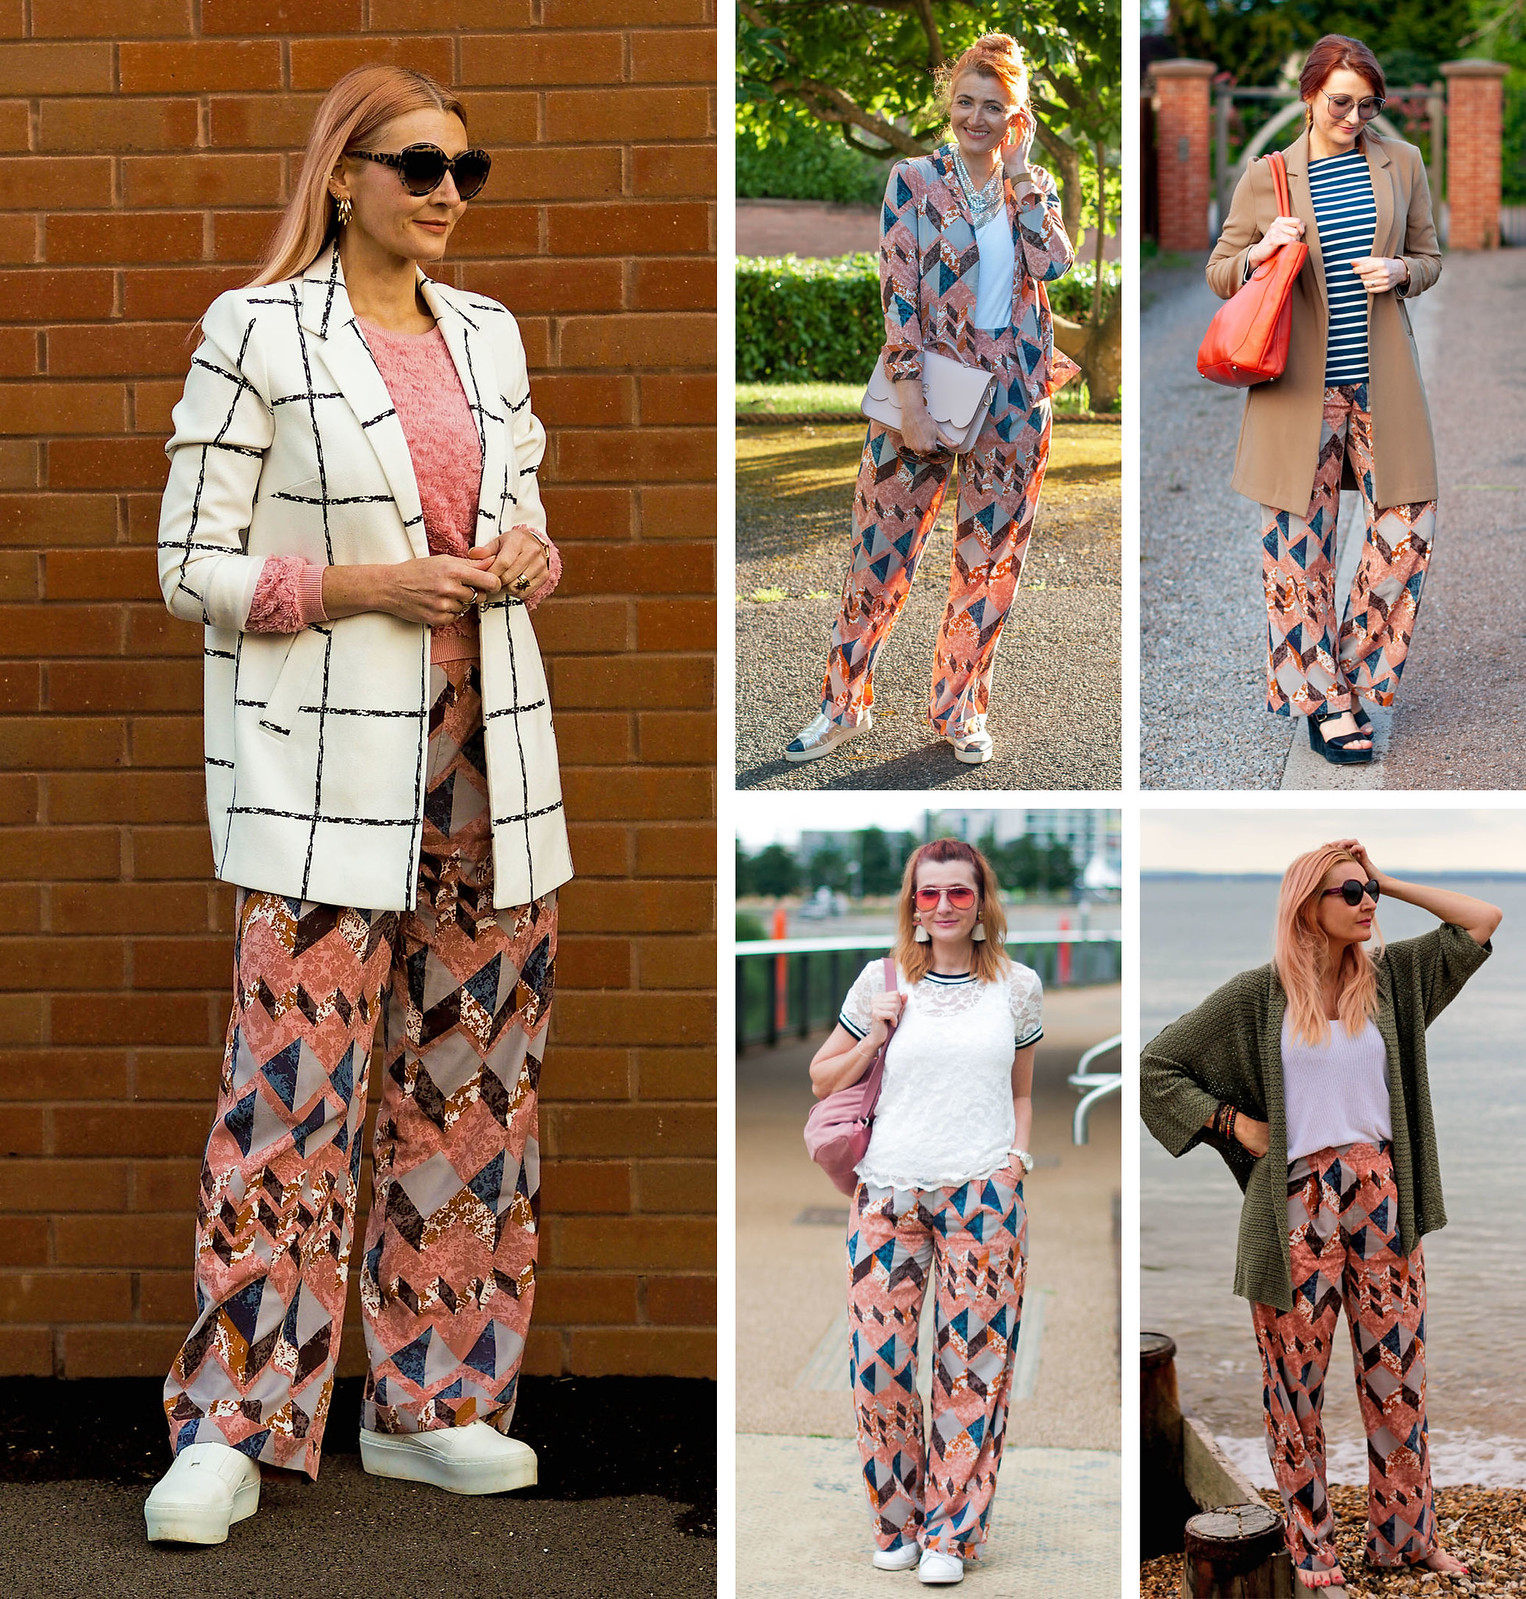 5 Ways to Wear Wide-Leg Pants / Trousers | from Not Dressed As Lamb, Over 40 Fashion and Style